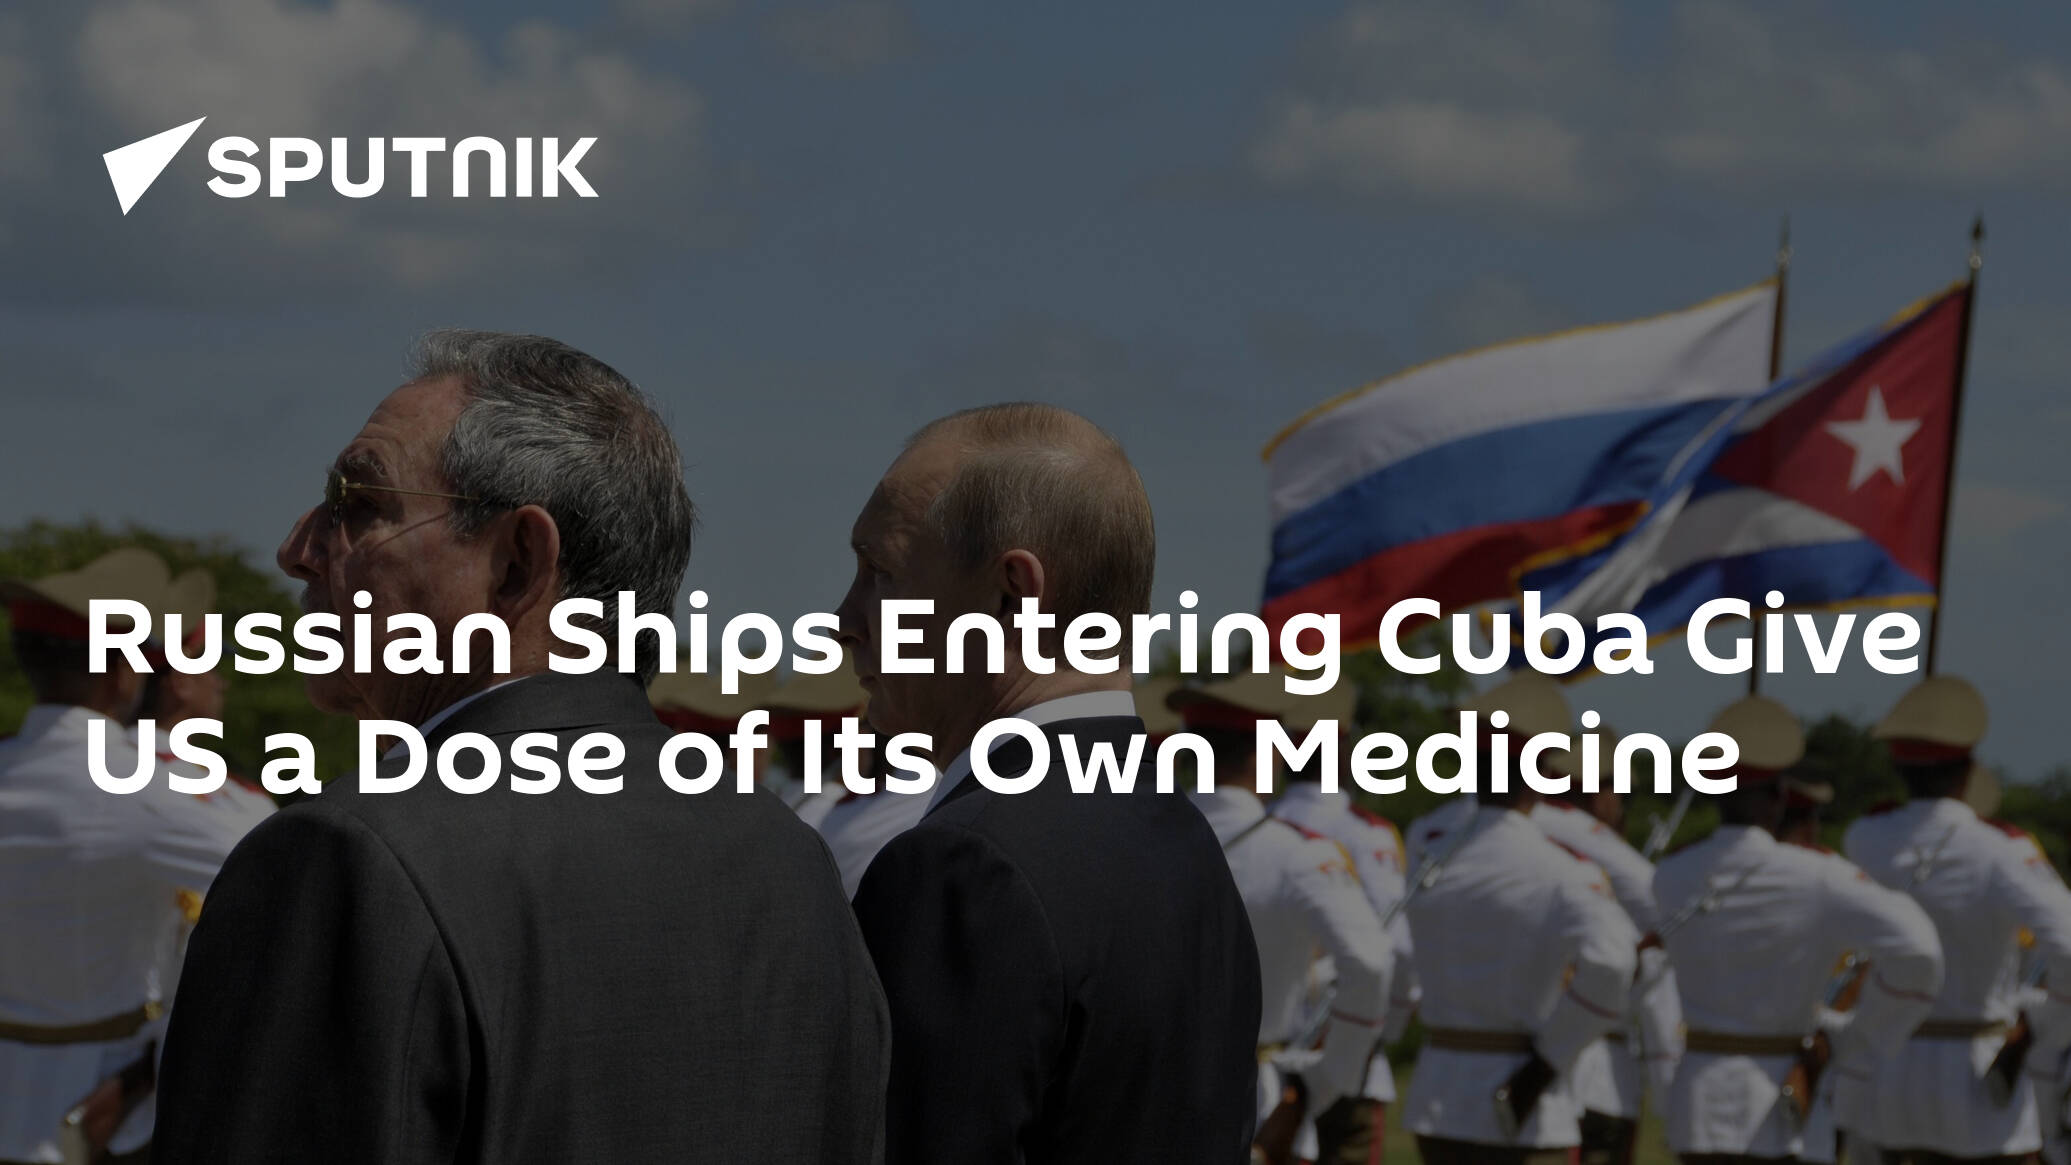 Russian Ships Entering Cuba Give US a Dose of Its Own Medicine